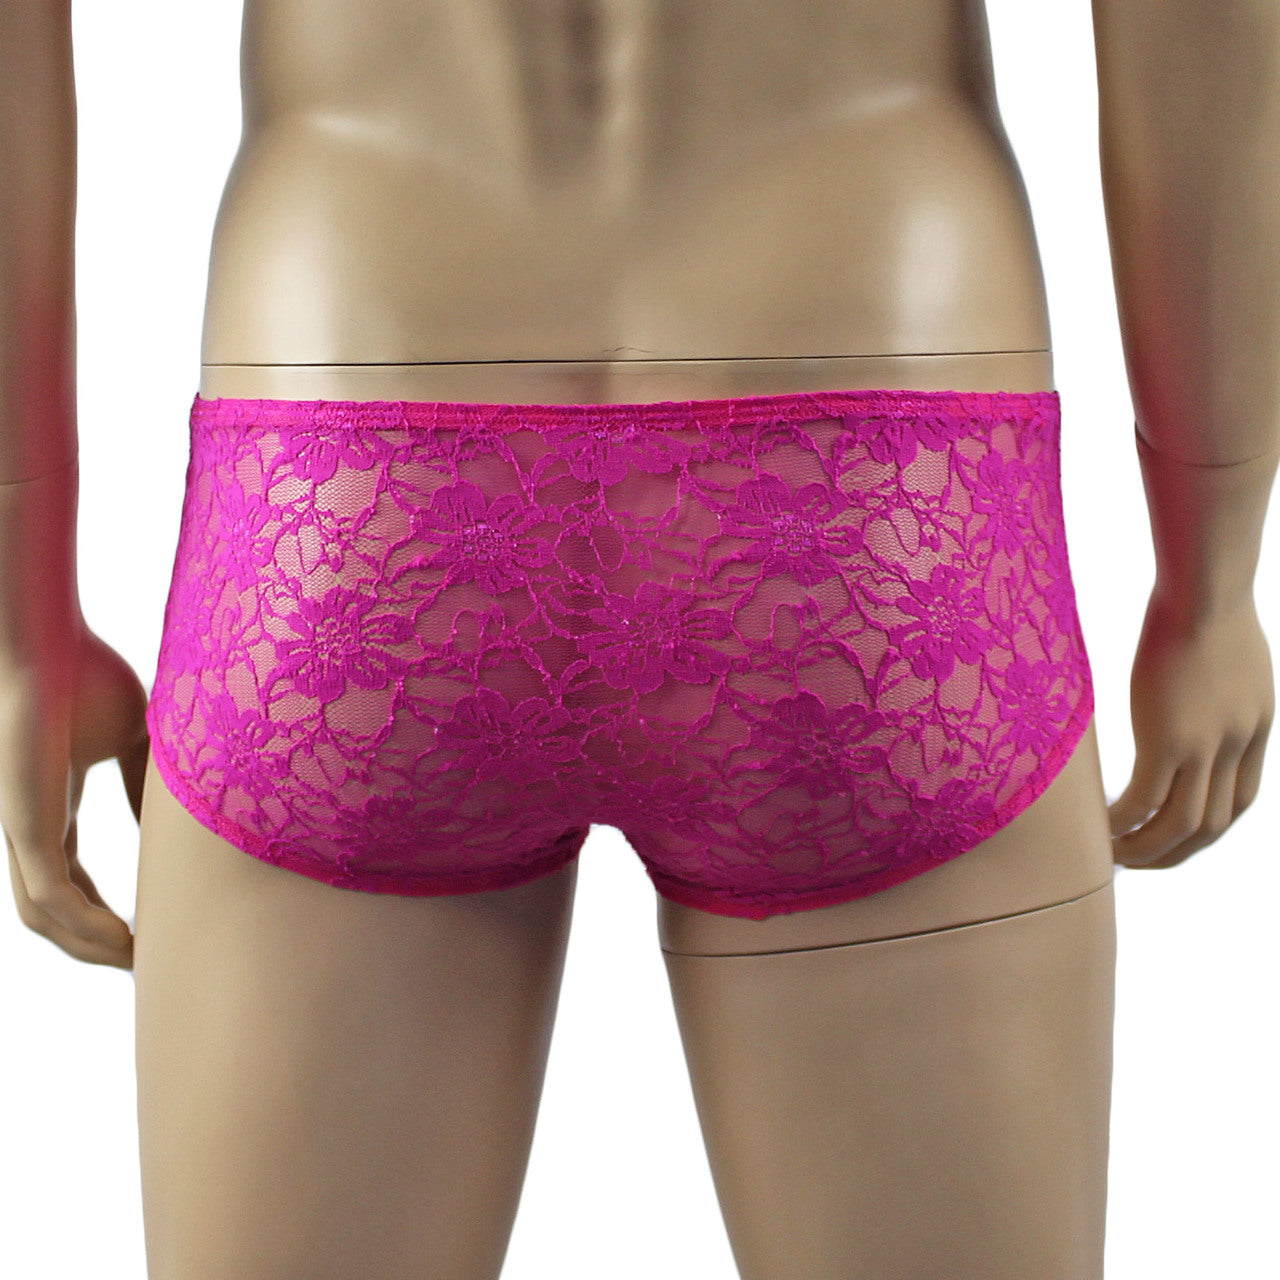 Mens Lingerie Stretch Lace  Male Panty Bikini Brief (neon pink plus other colours)